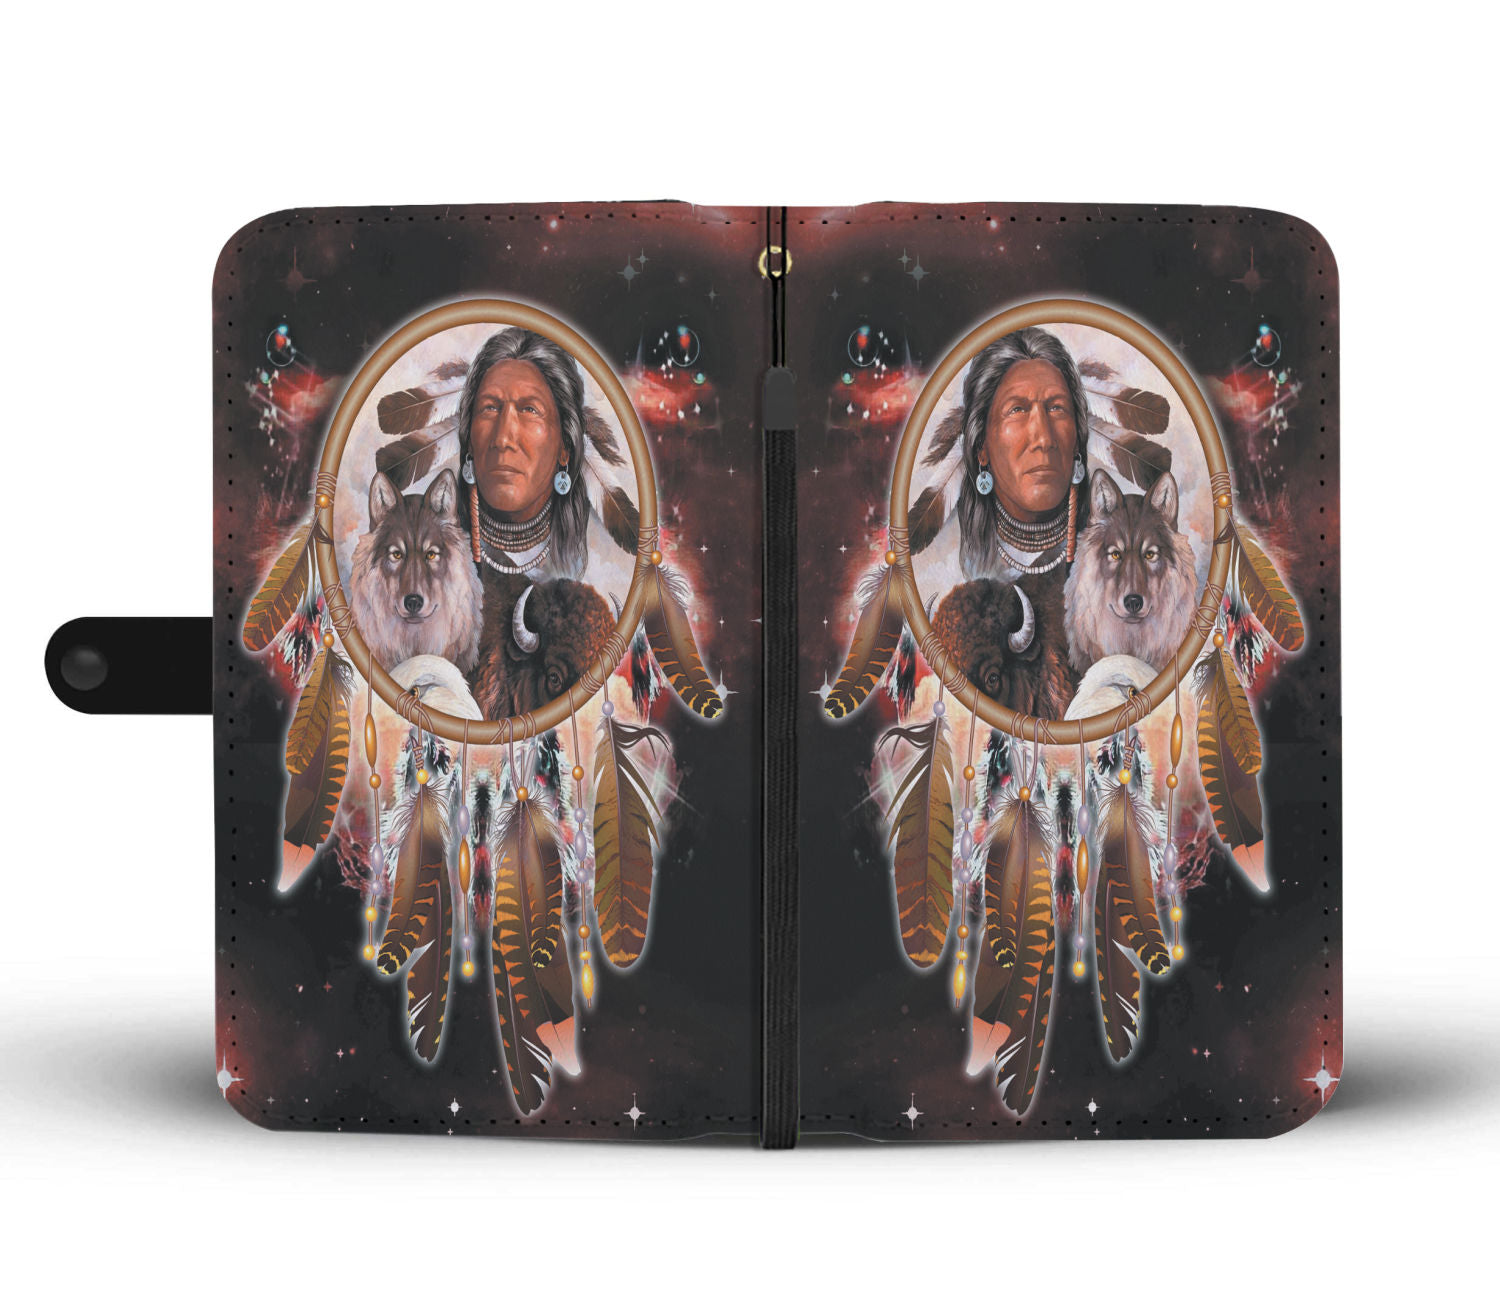 Powwow Store gb nat00393 chief animals red galaxy wallet phone case